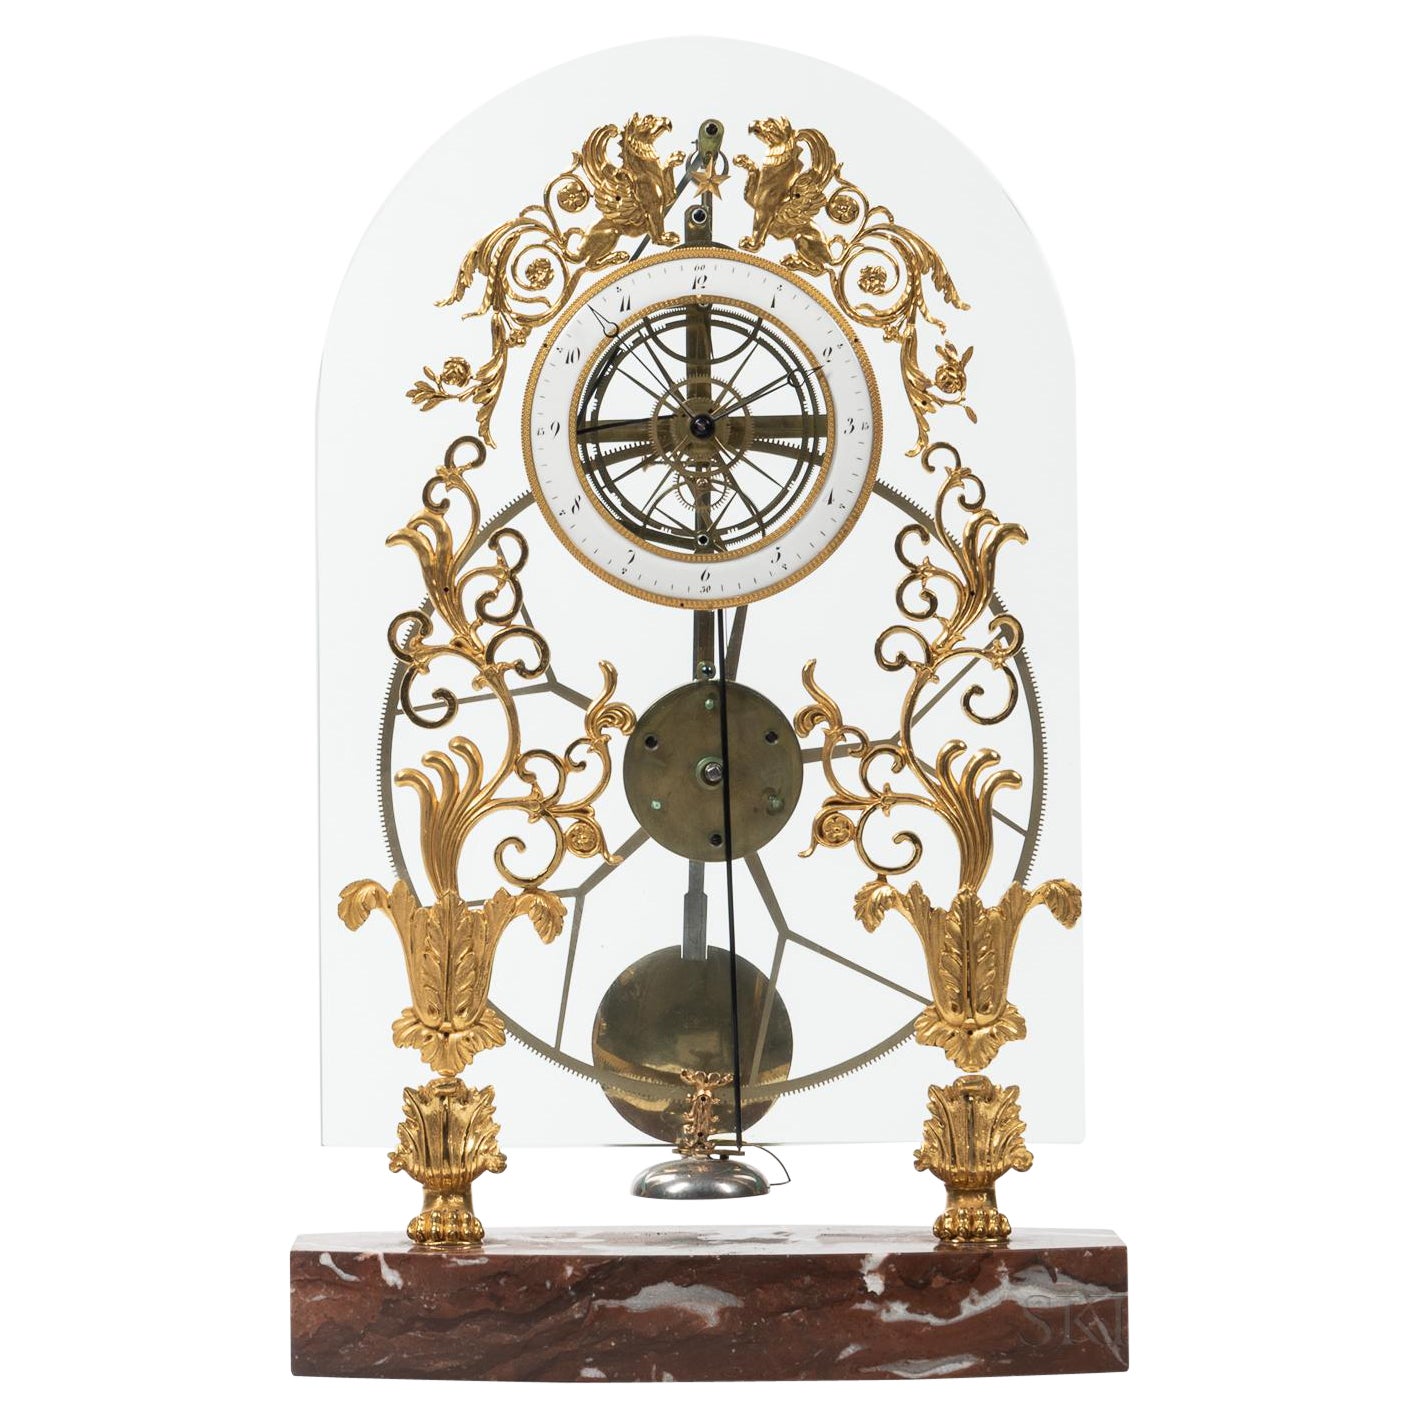 Rare French Glass-Plate Skeleton Clock with Remontoire Strike